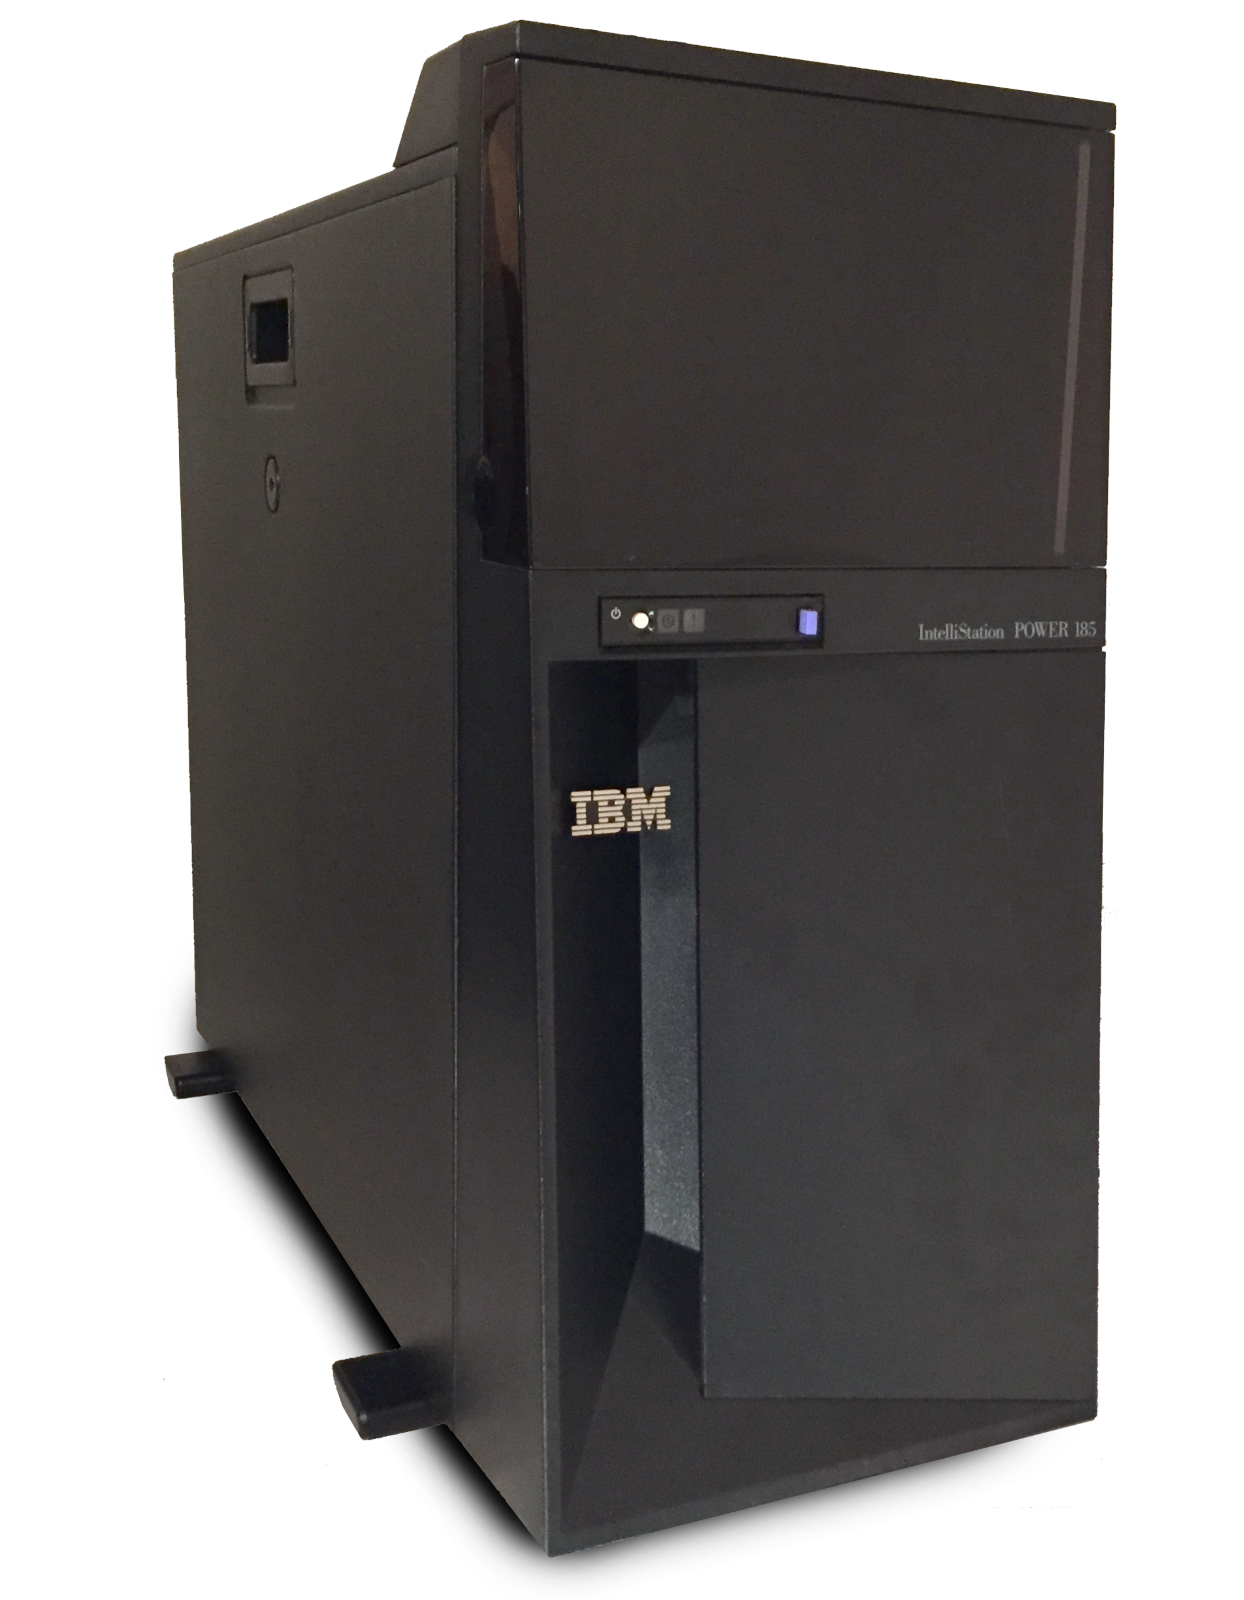 Ibm Pro Computer Video Graphics Cards Intellistation PNG Image